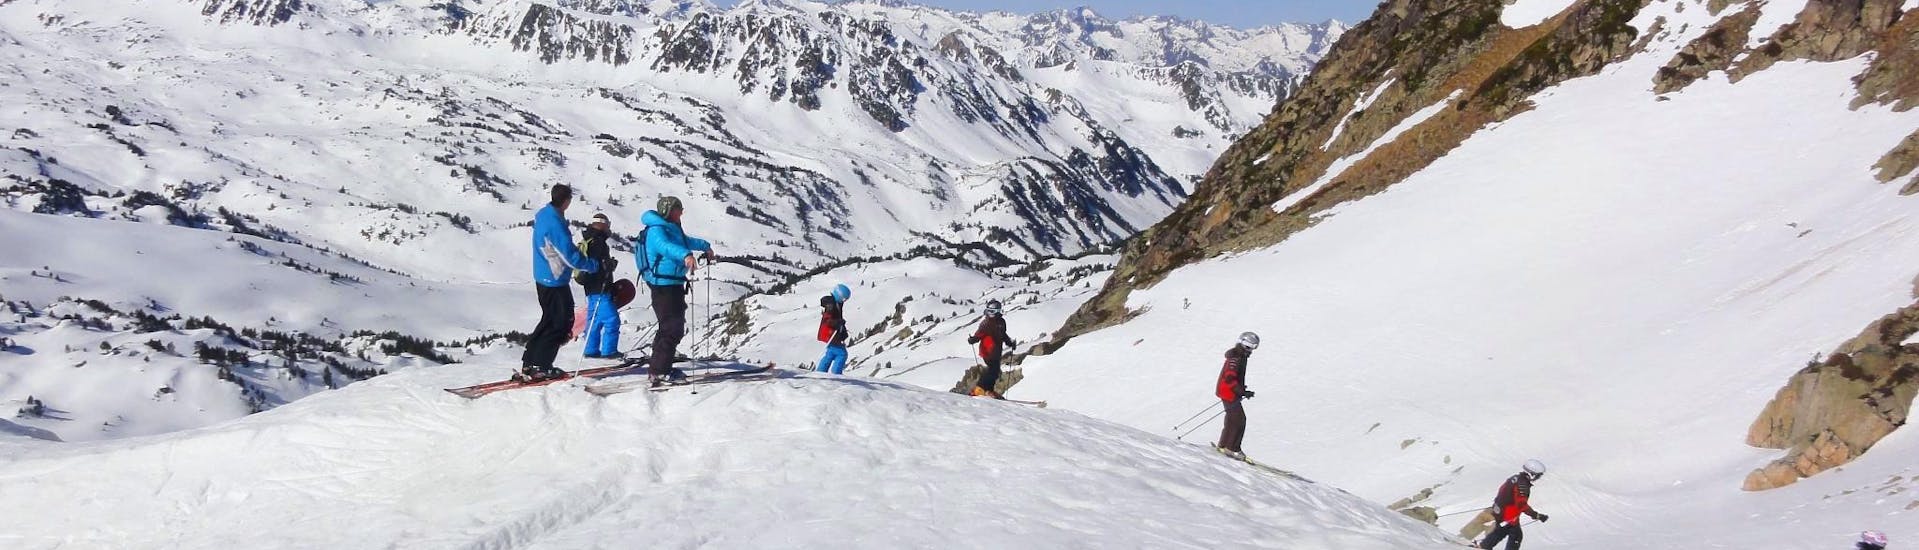 Kids are skiing from the top of the slopes during their Kids Ski Lessons (5-15 years) - Experienced with the ski school ESI Ecoloski Barèges.